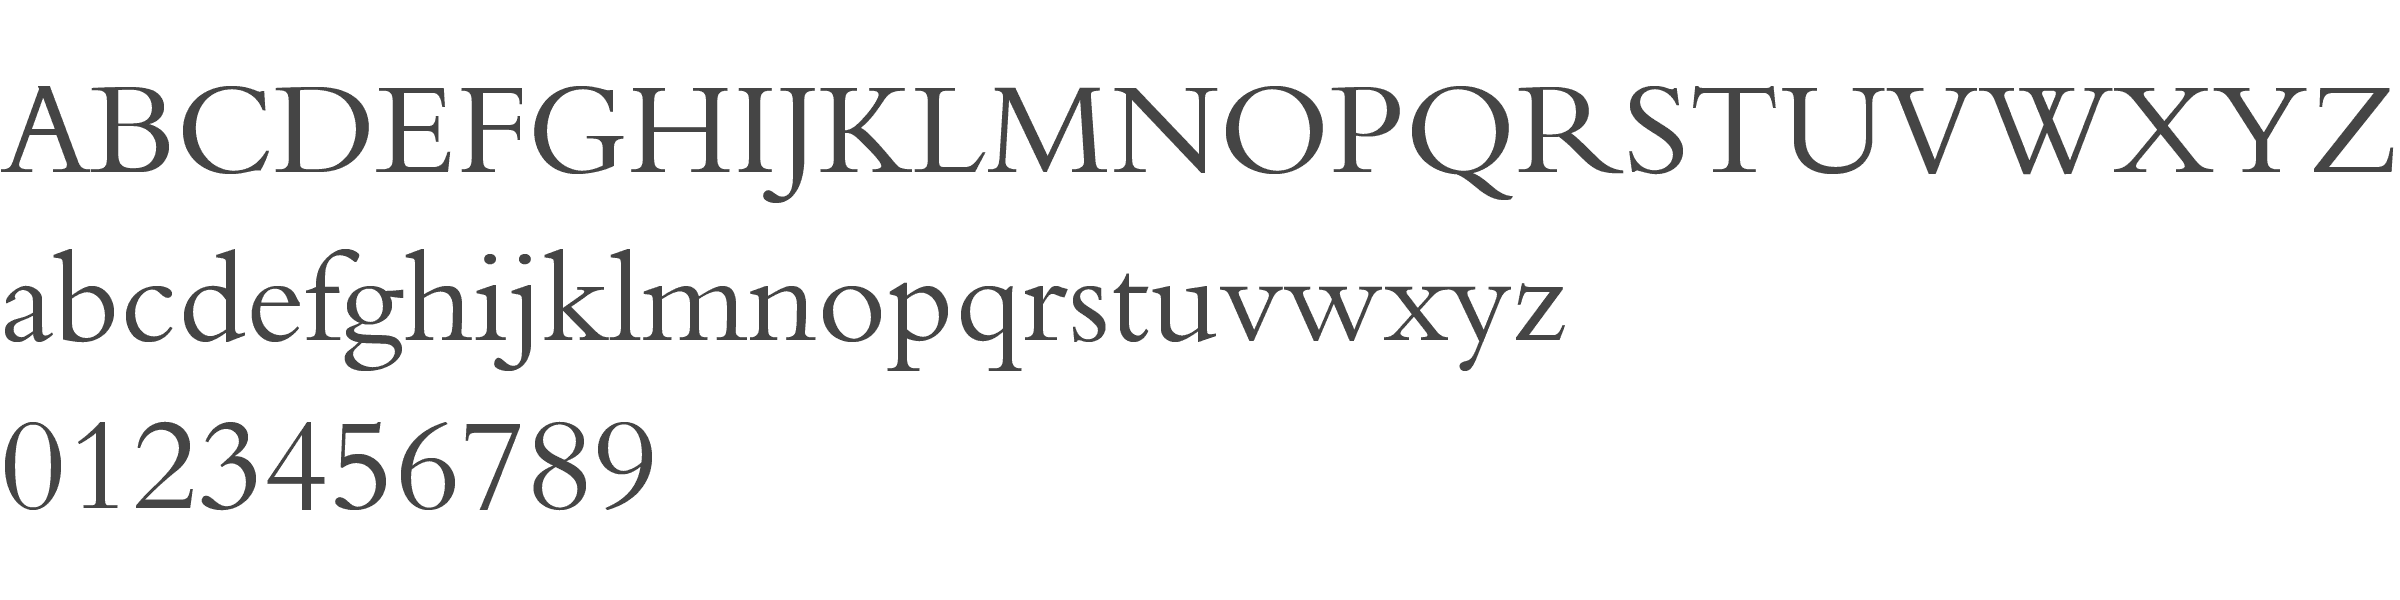 Example of Bembo font: Characters A to Z in upper and lower case, and digits 0 to 9